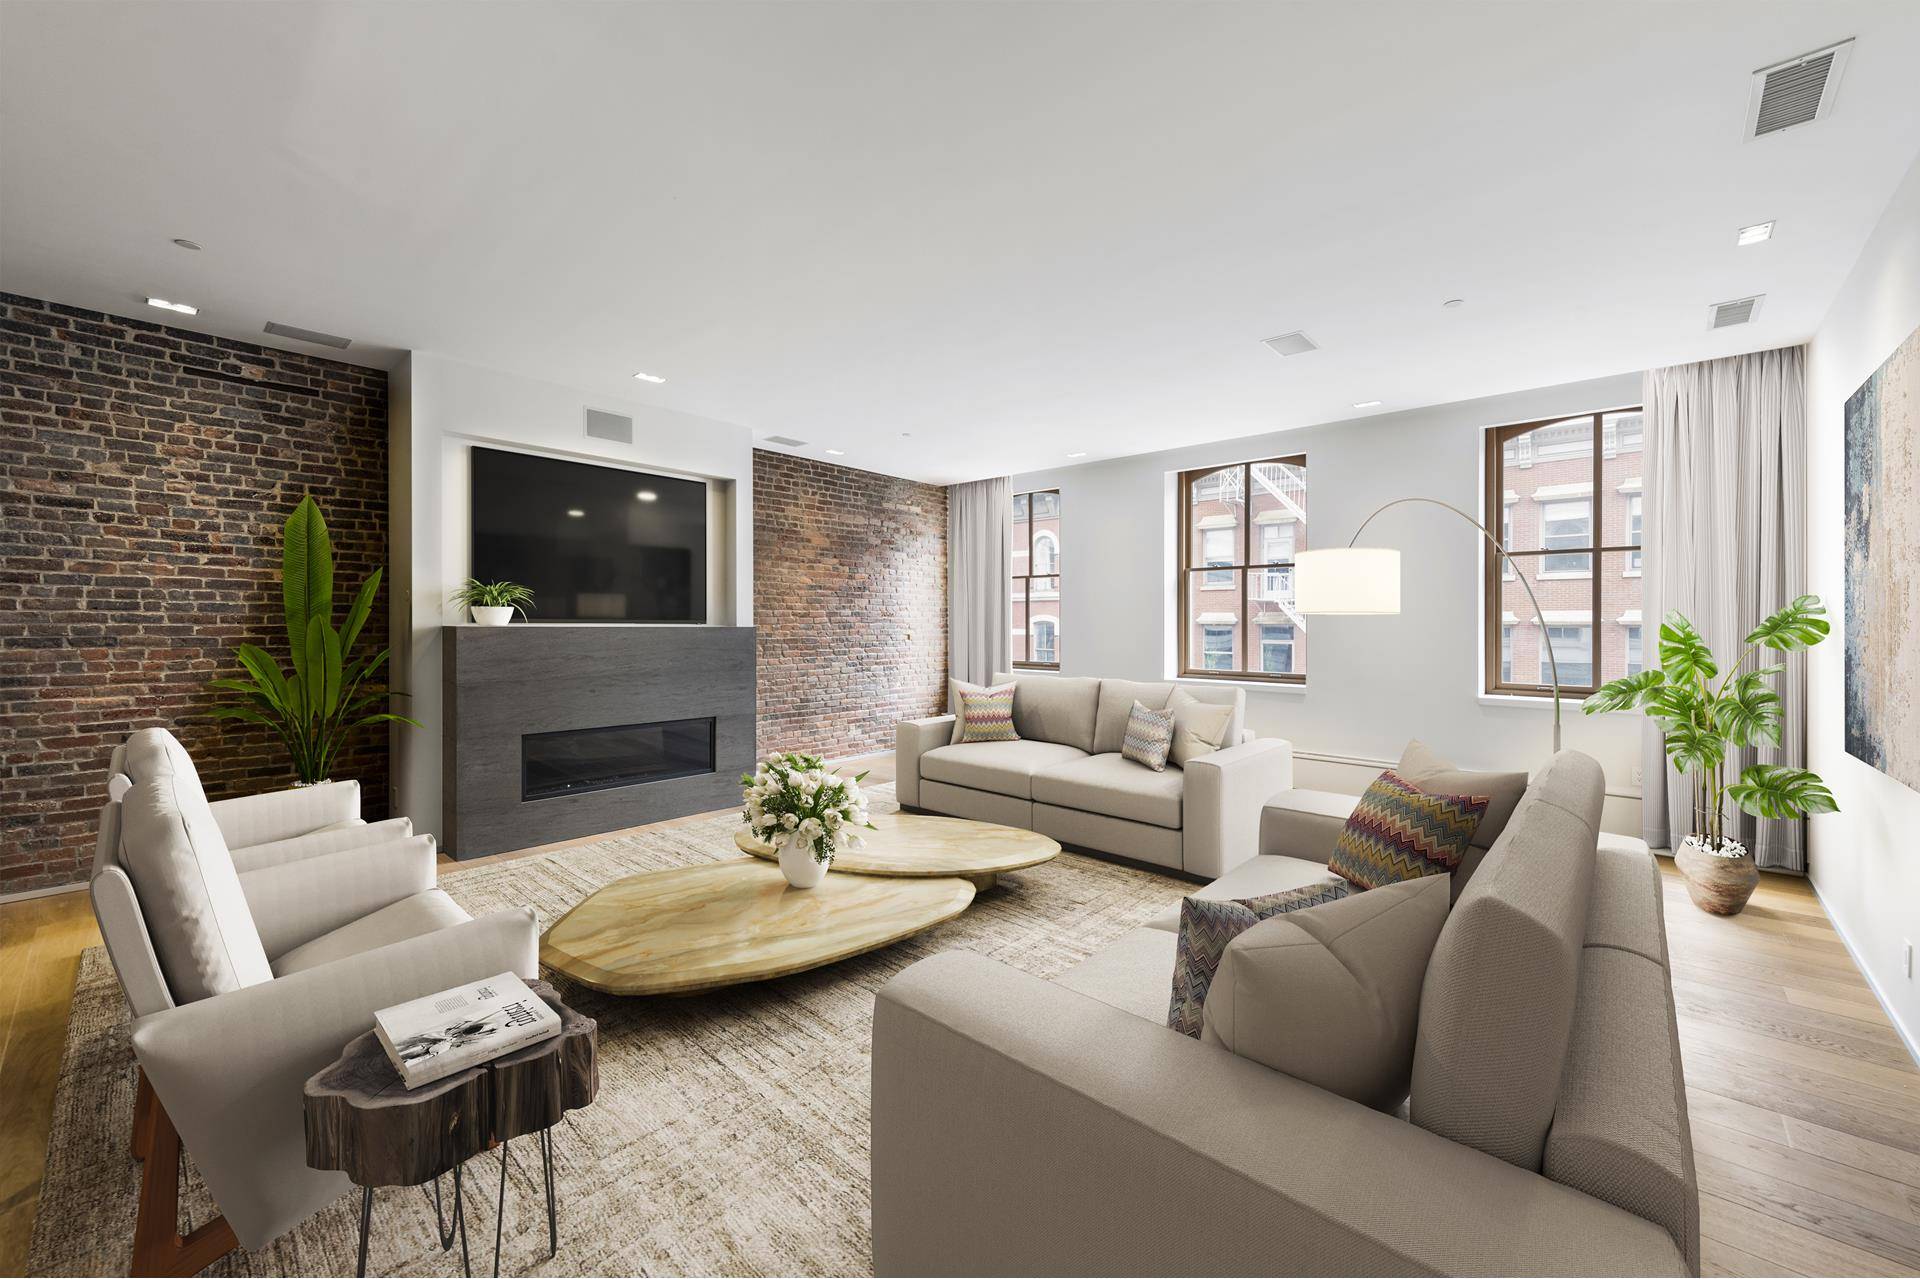 In the heart of Tribeca, enter this spectacular 3, 627 square foot 3 bedroom 2.